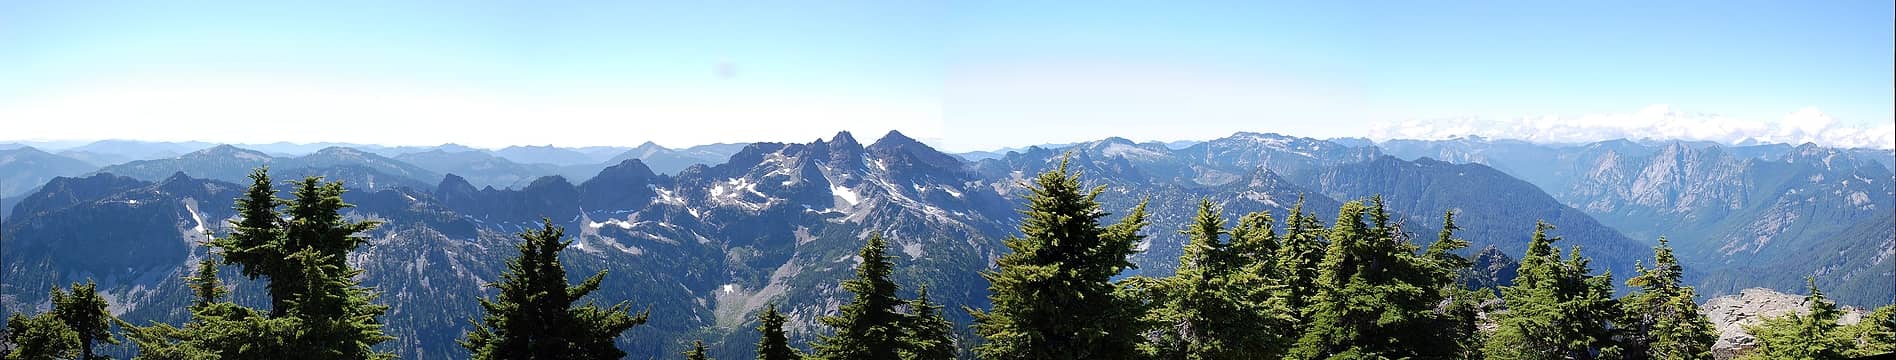 The Snoqualmie Range spans across the view west